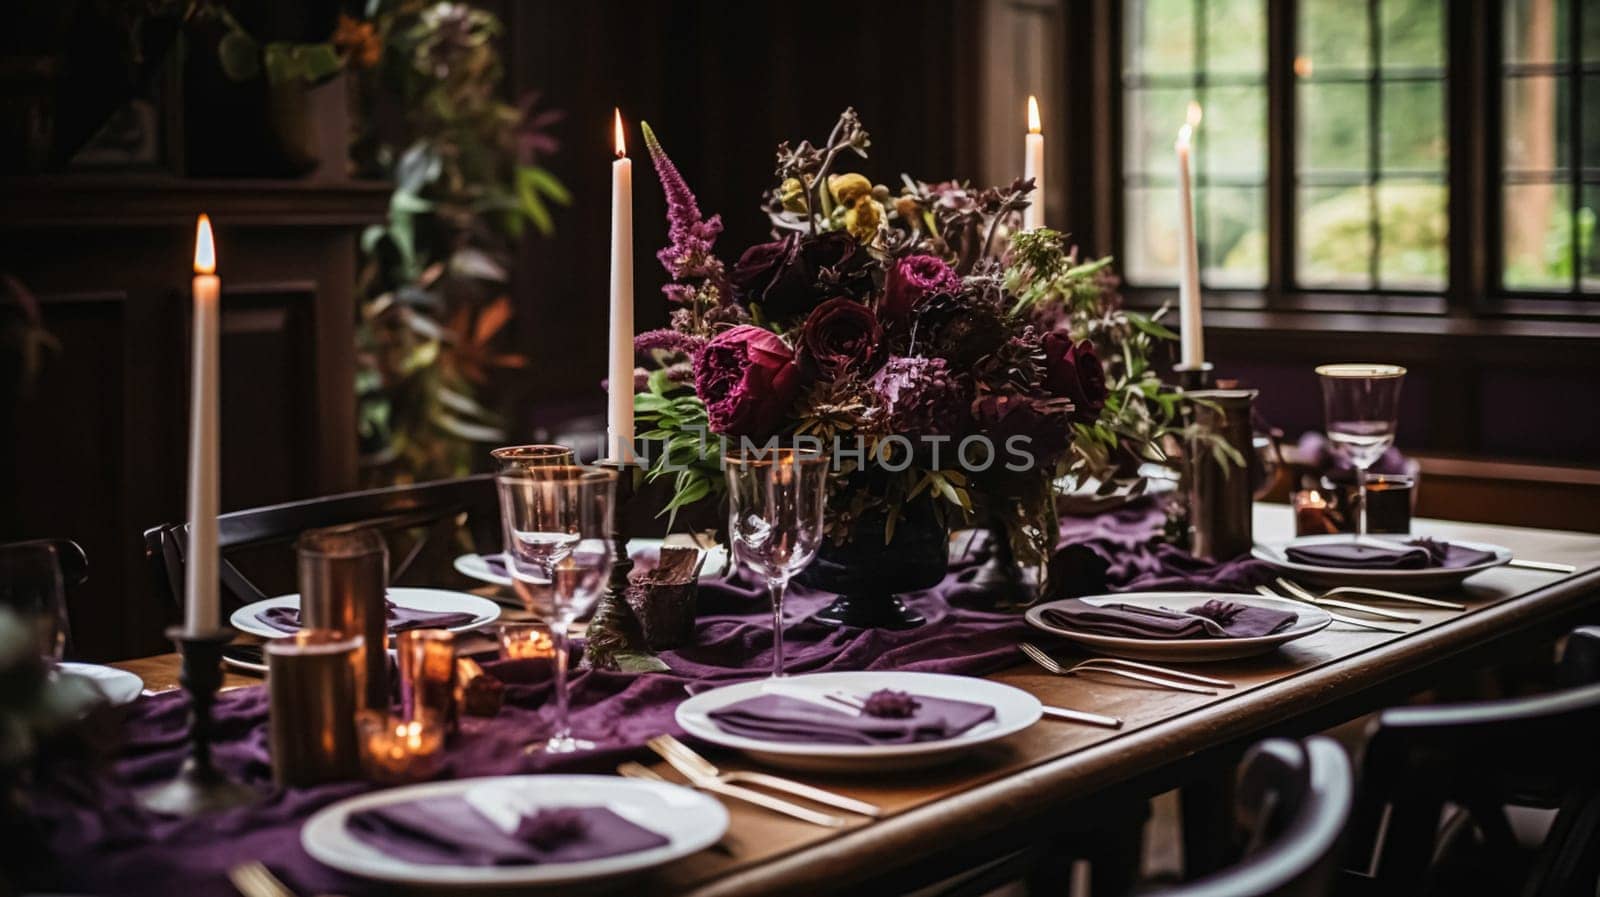 Dinner table setting in the warm glow of candlelight, tablescape featuring floral centerpiece, elegant burgundy glassware, and luxurious gold cutlery by Anneleven